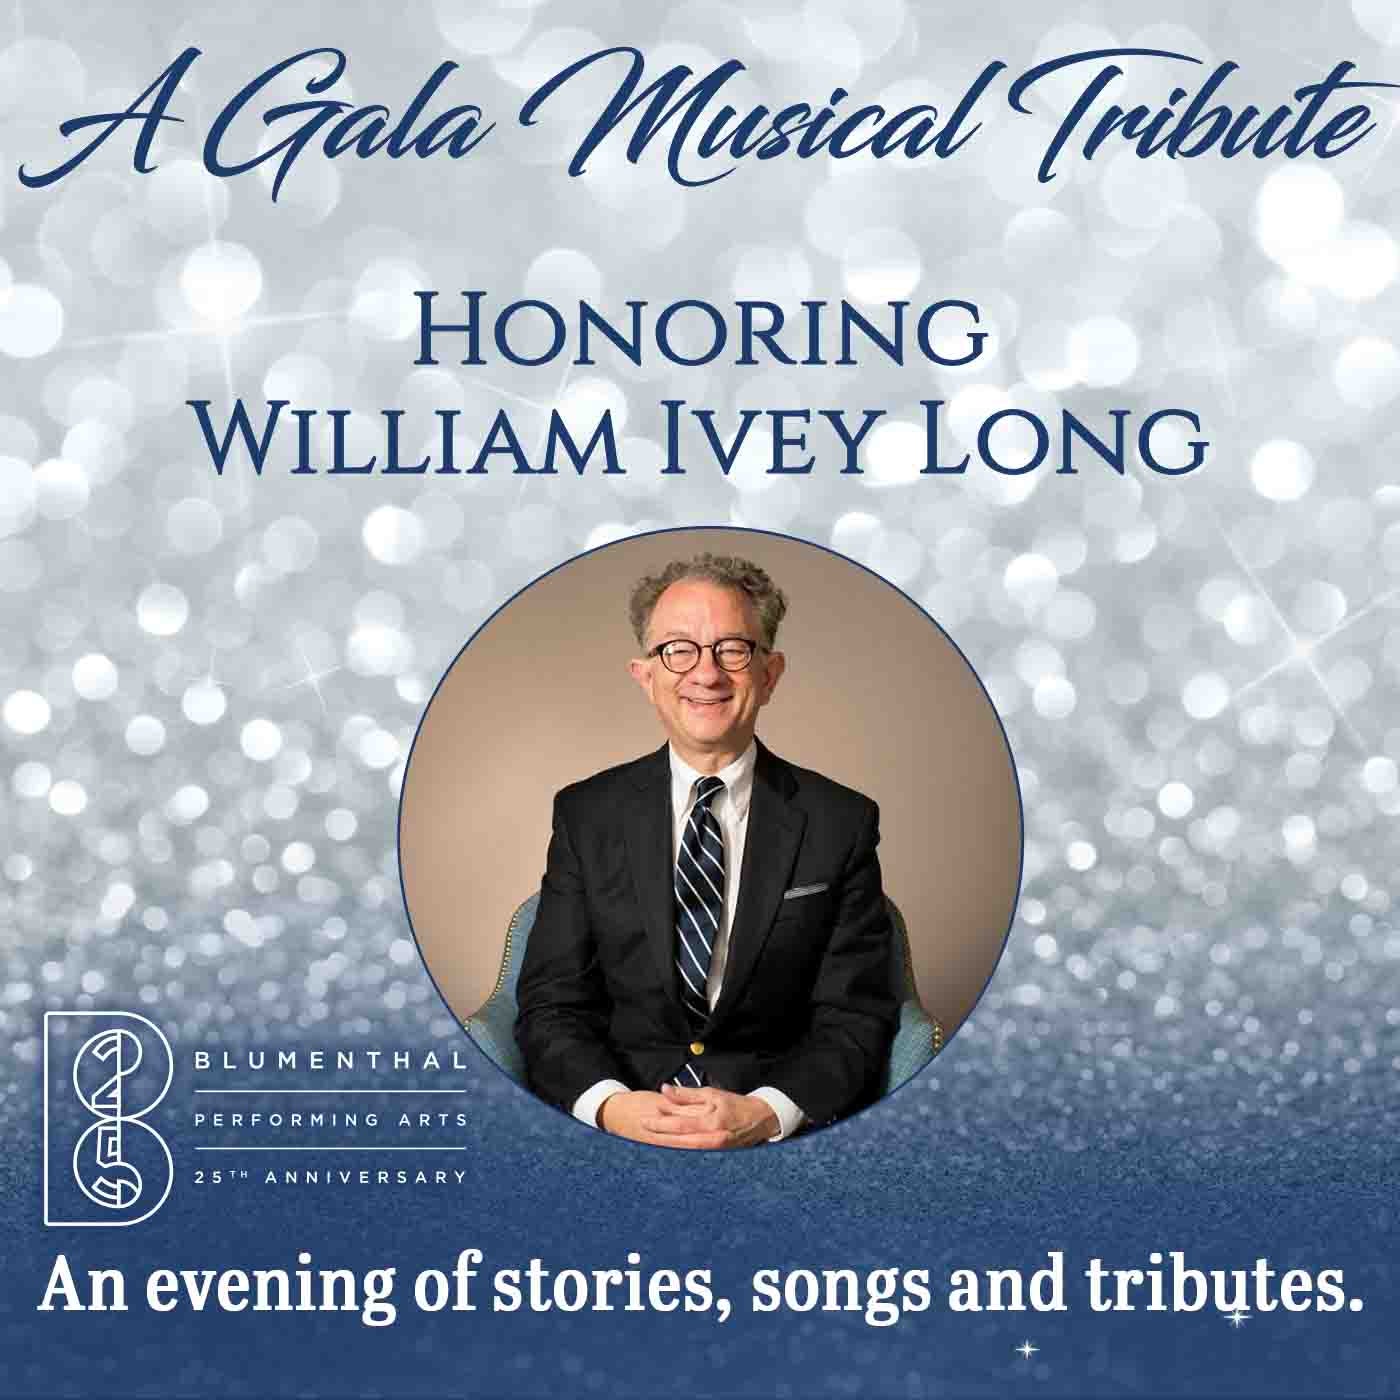 A Gala Musical Tribute Honoring William Ivey Long